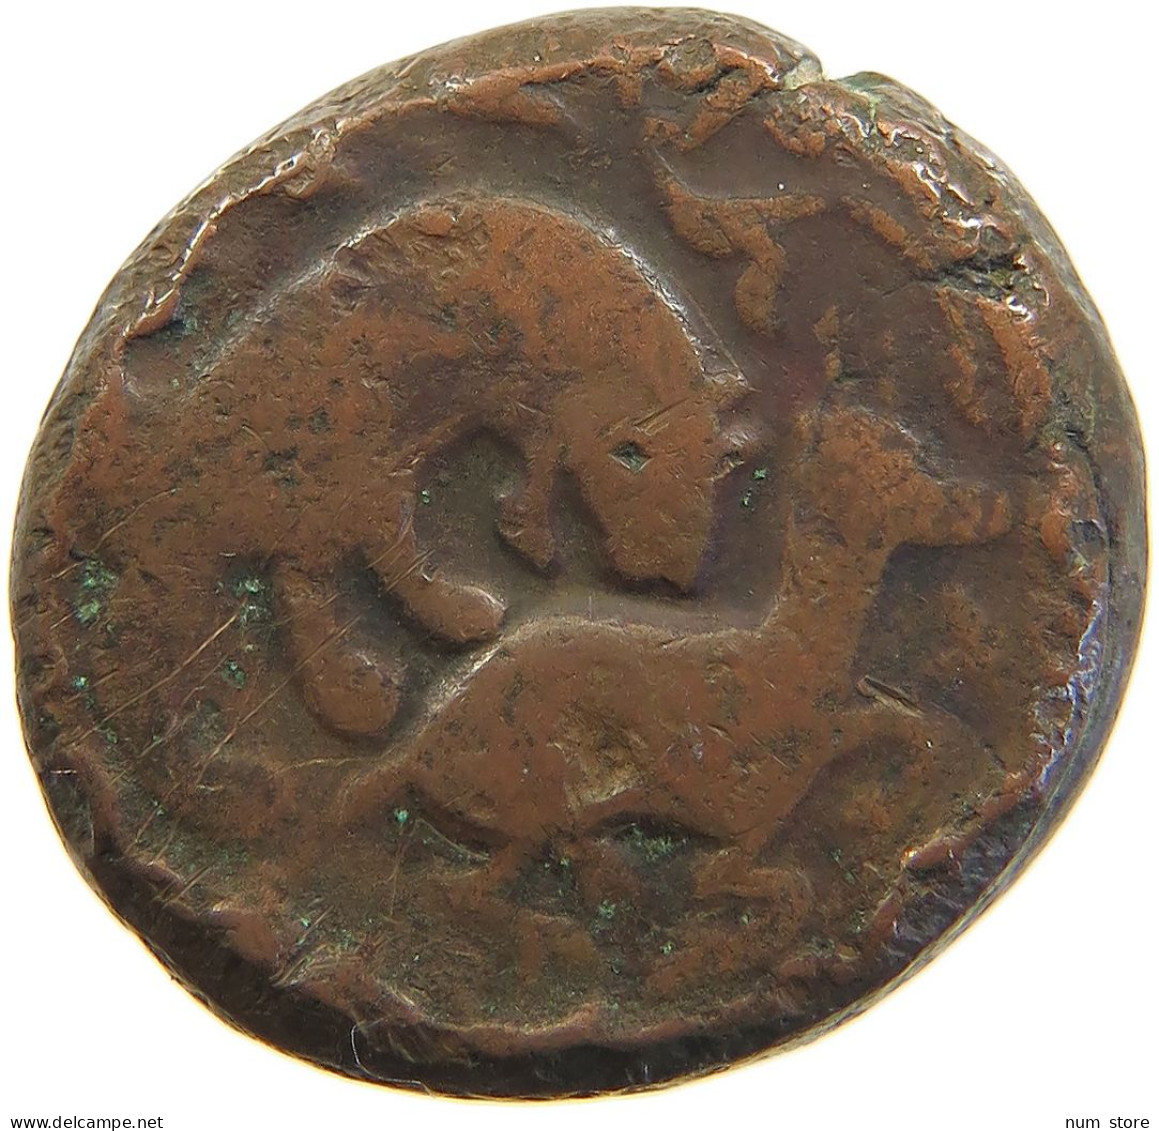 ISLAMIC FALUS FALS LION ATACKING DEER FIGURATIVE COINAGES IRAN / PERSIA / AFGHANISTAN 24MM 18.5G #t034 0095 - Iran